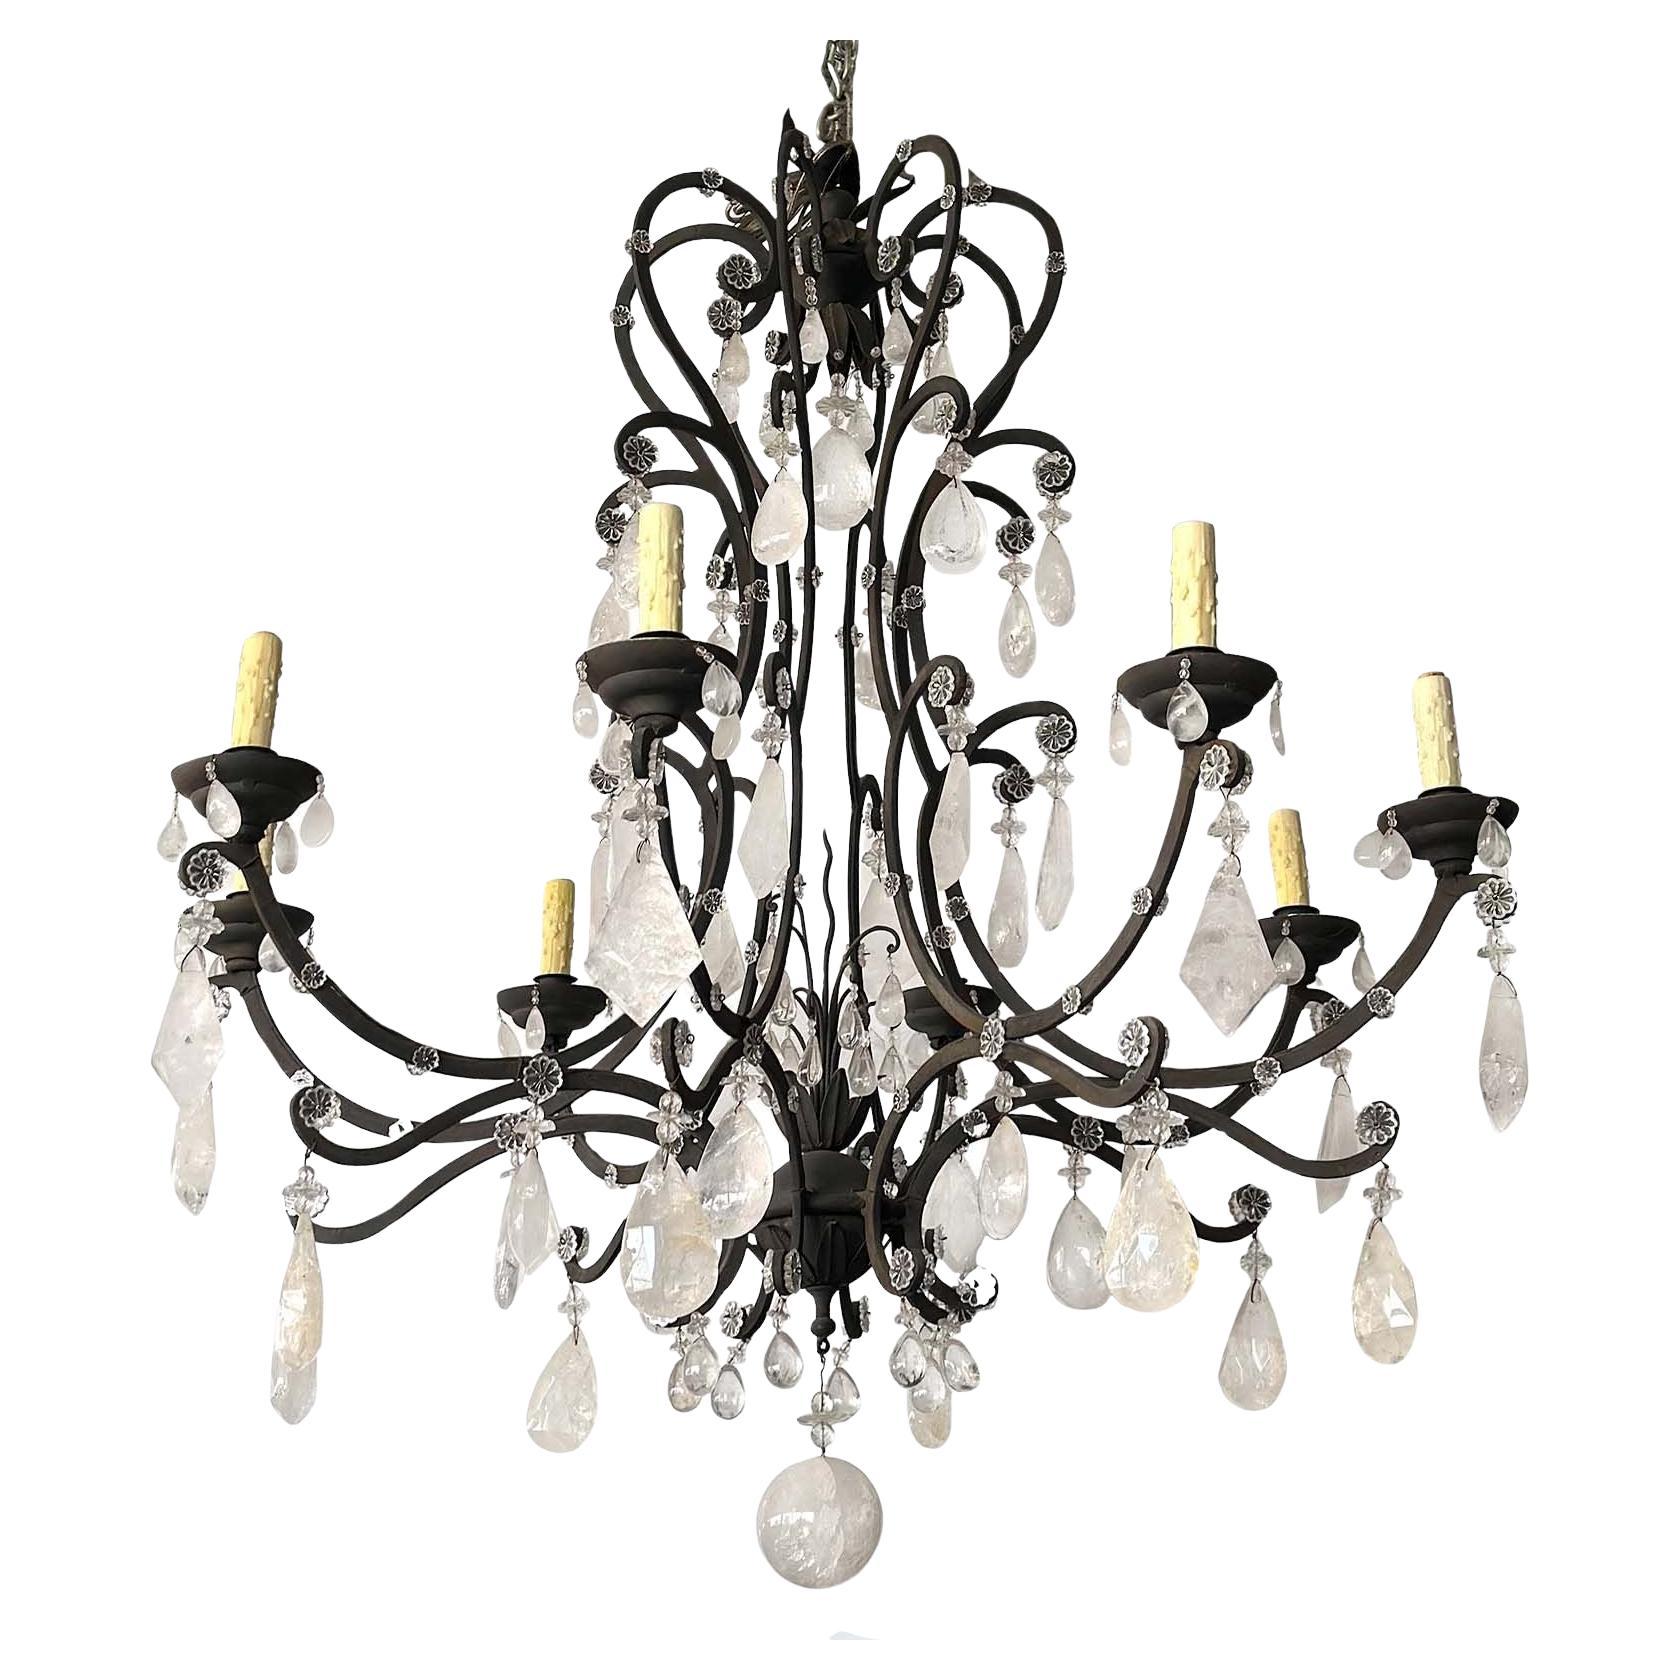 Large Venetian Rock Crystal & Wrought Iron Chandelier, Italy, c. 1950's For Sale